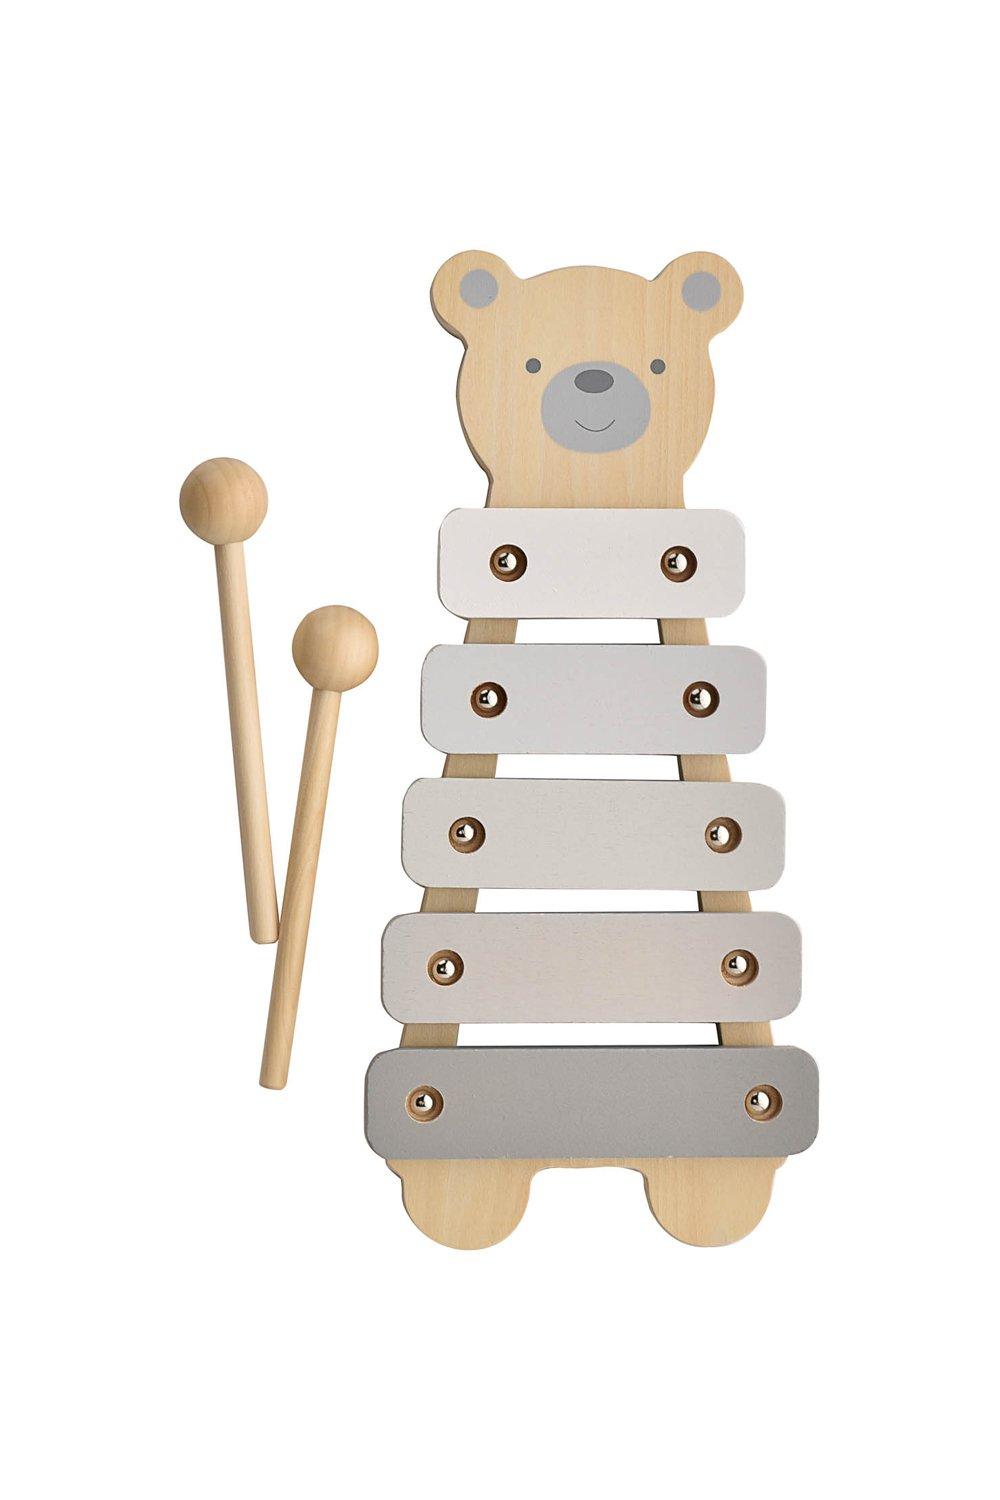 Wooden Toy Xylophone - Teddy